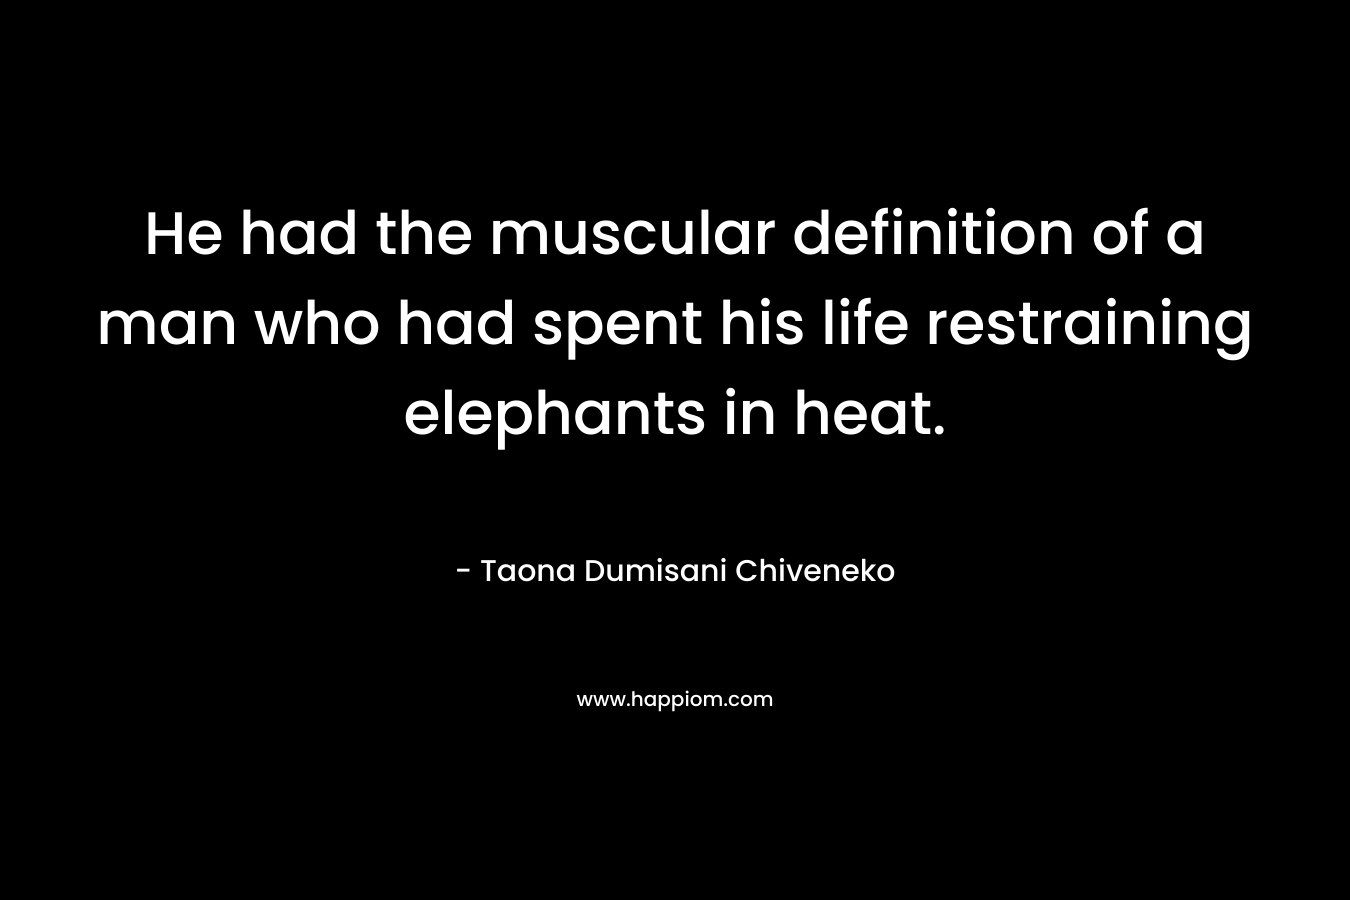 He had the muscular definition of a man who had spent his life restraining elephants in heat. – Taona Dumisani Chiveneko